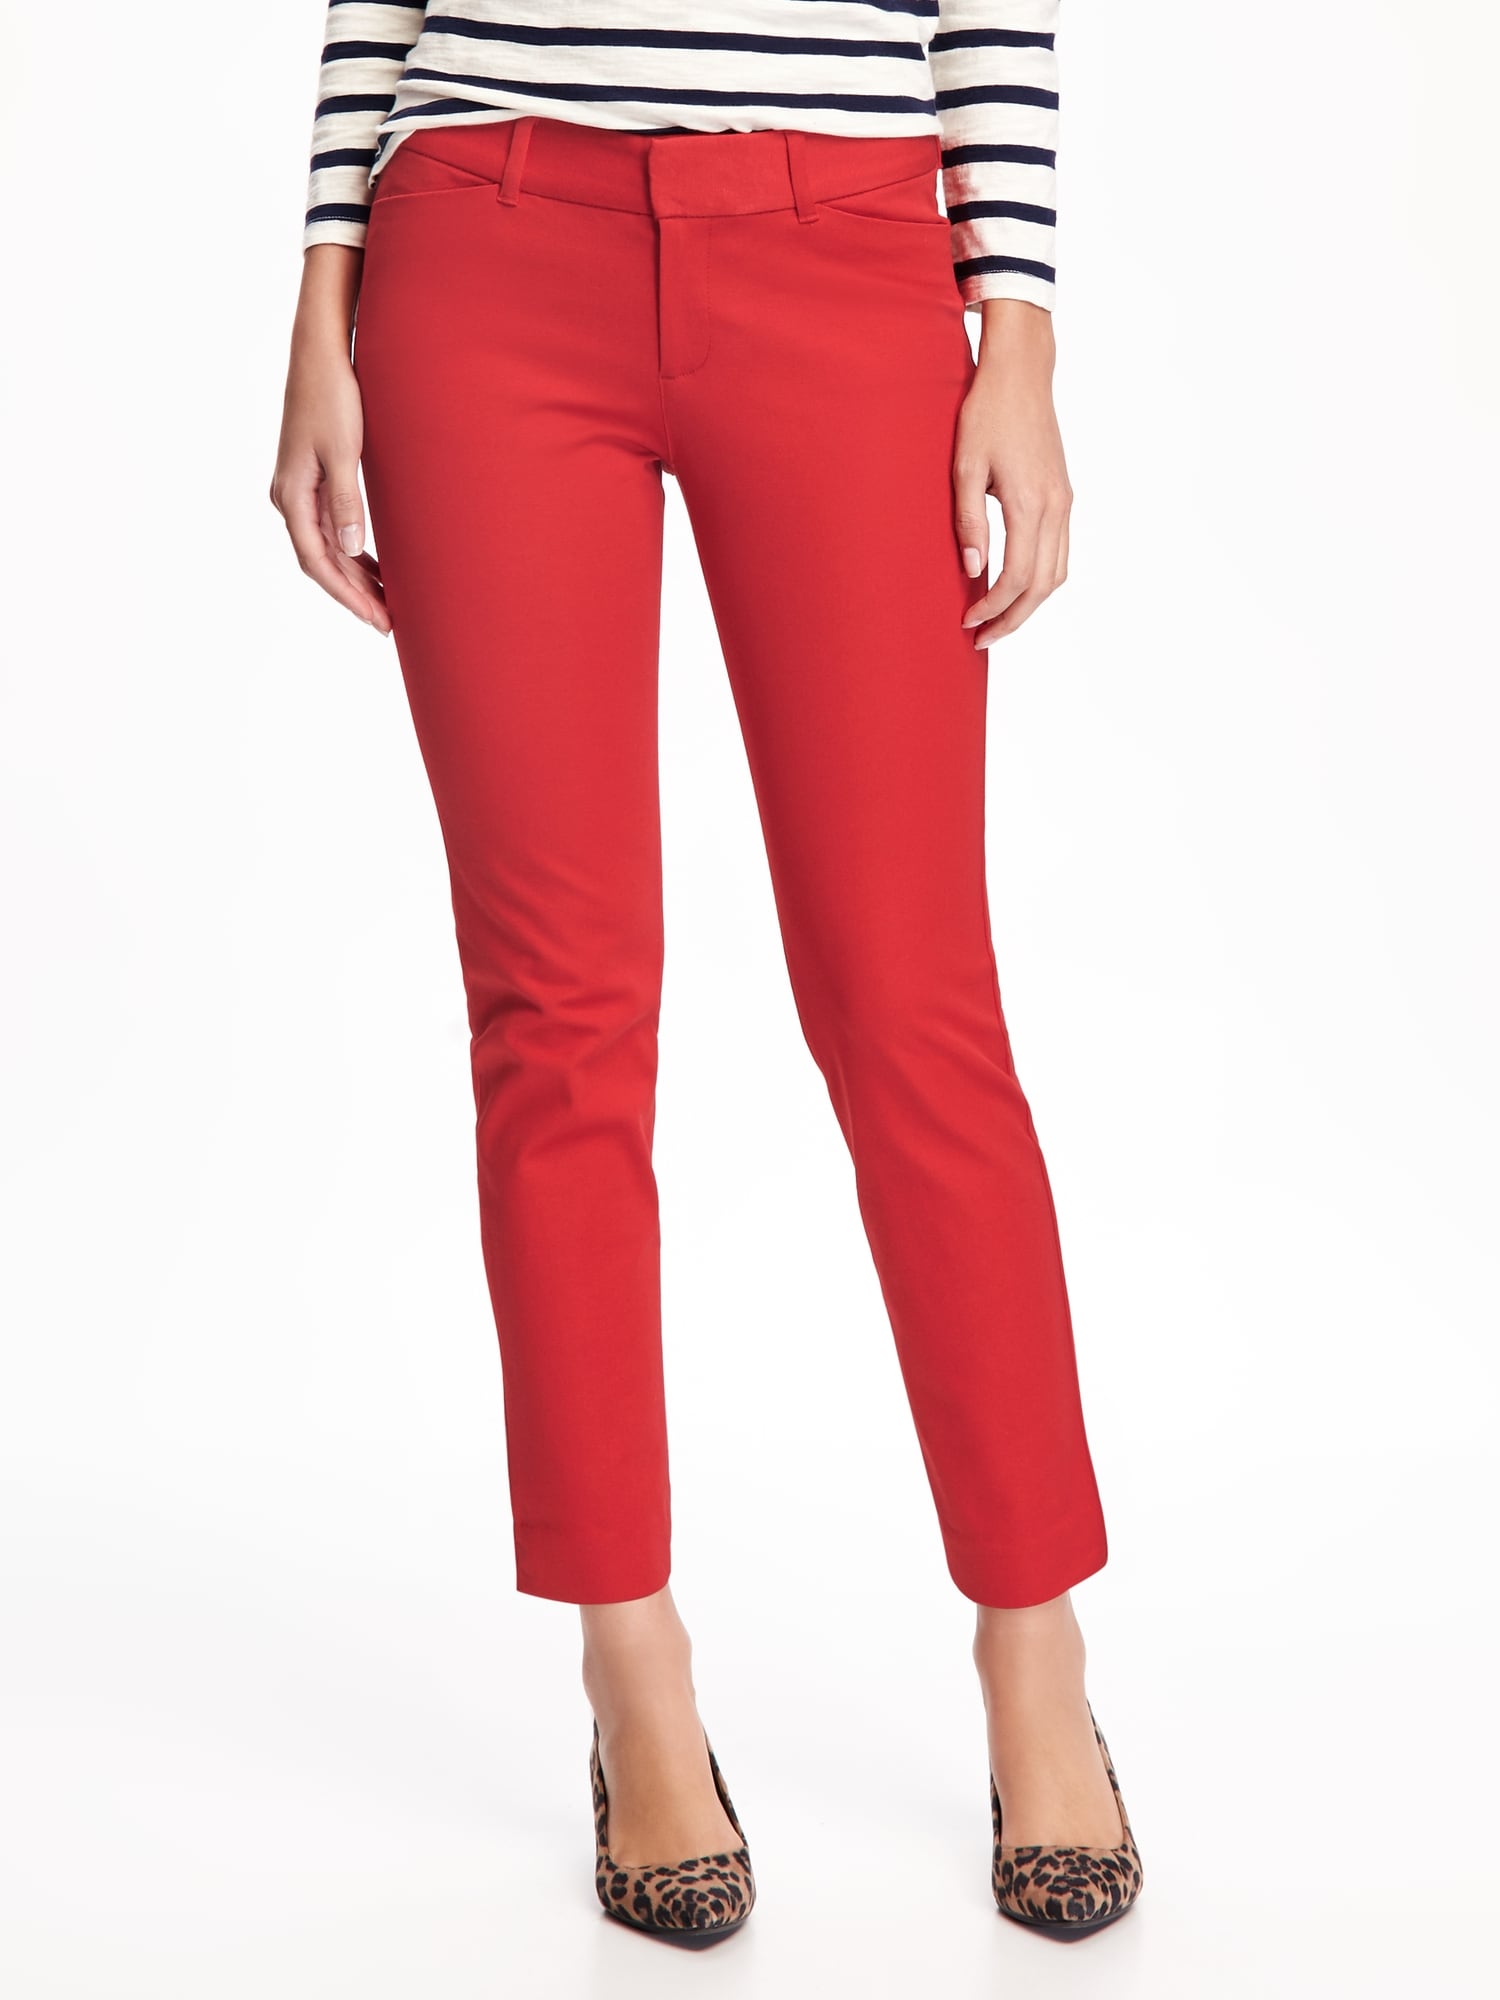 OLD NAVY,Mid-Rise Built-In Sculpt Ponte-Knit Pixie Ankle Pants for